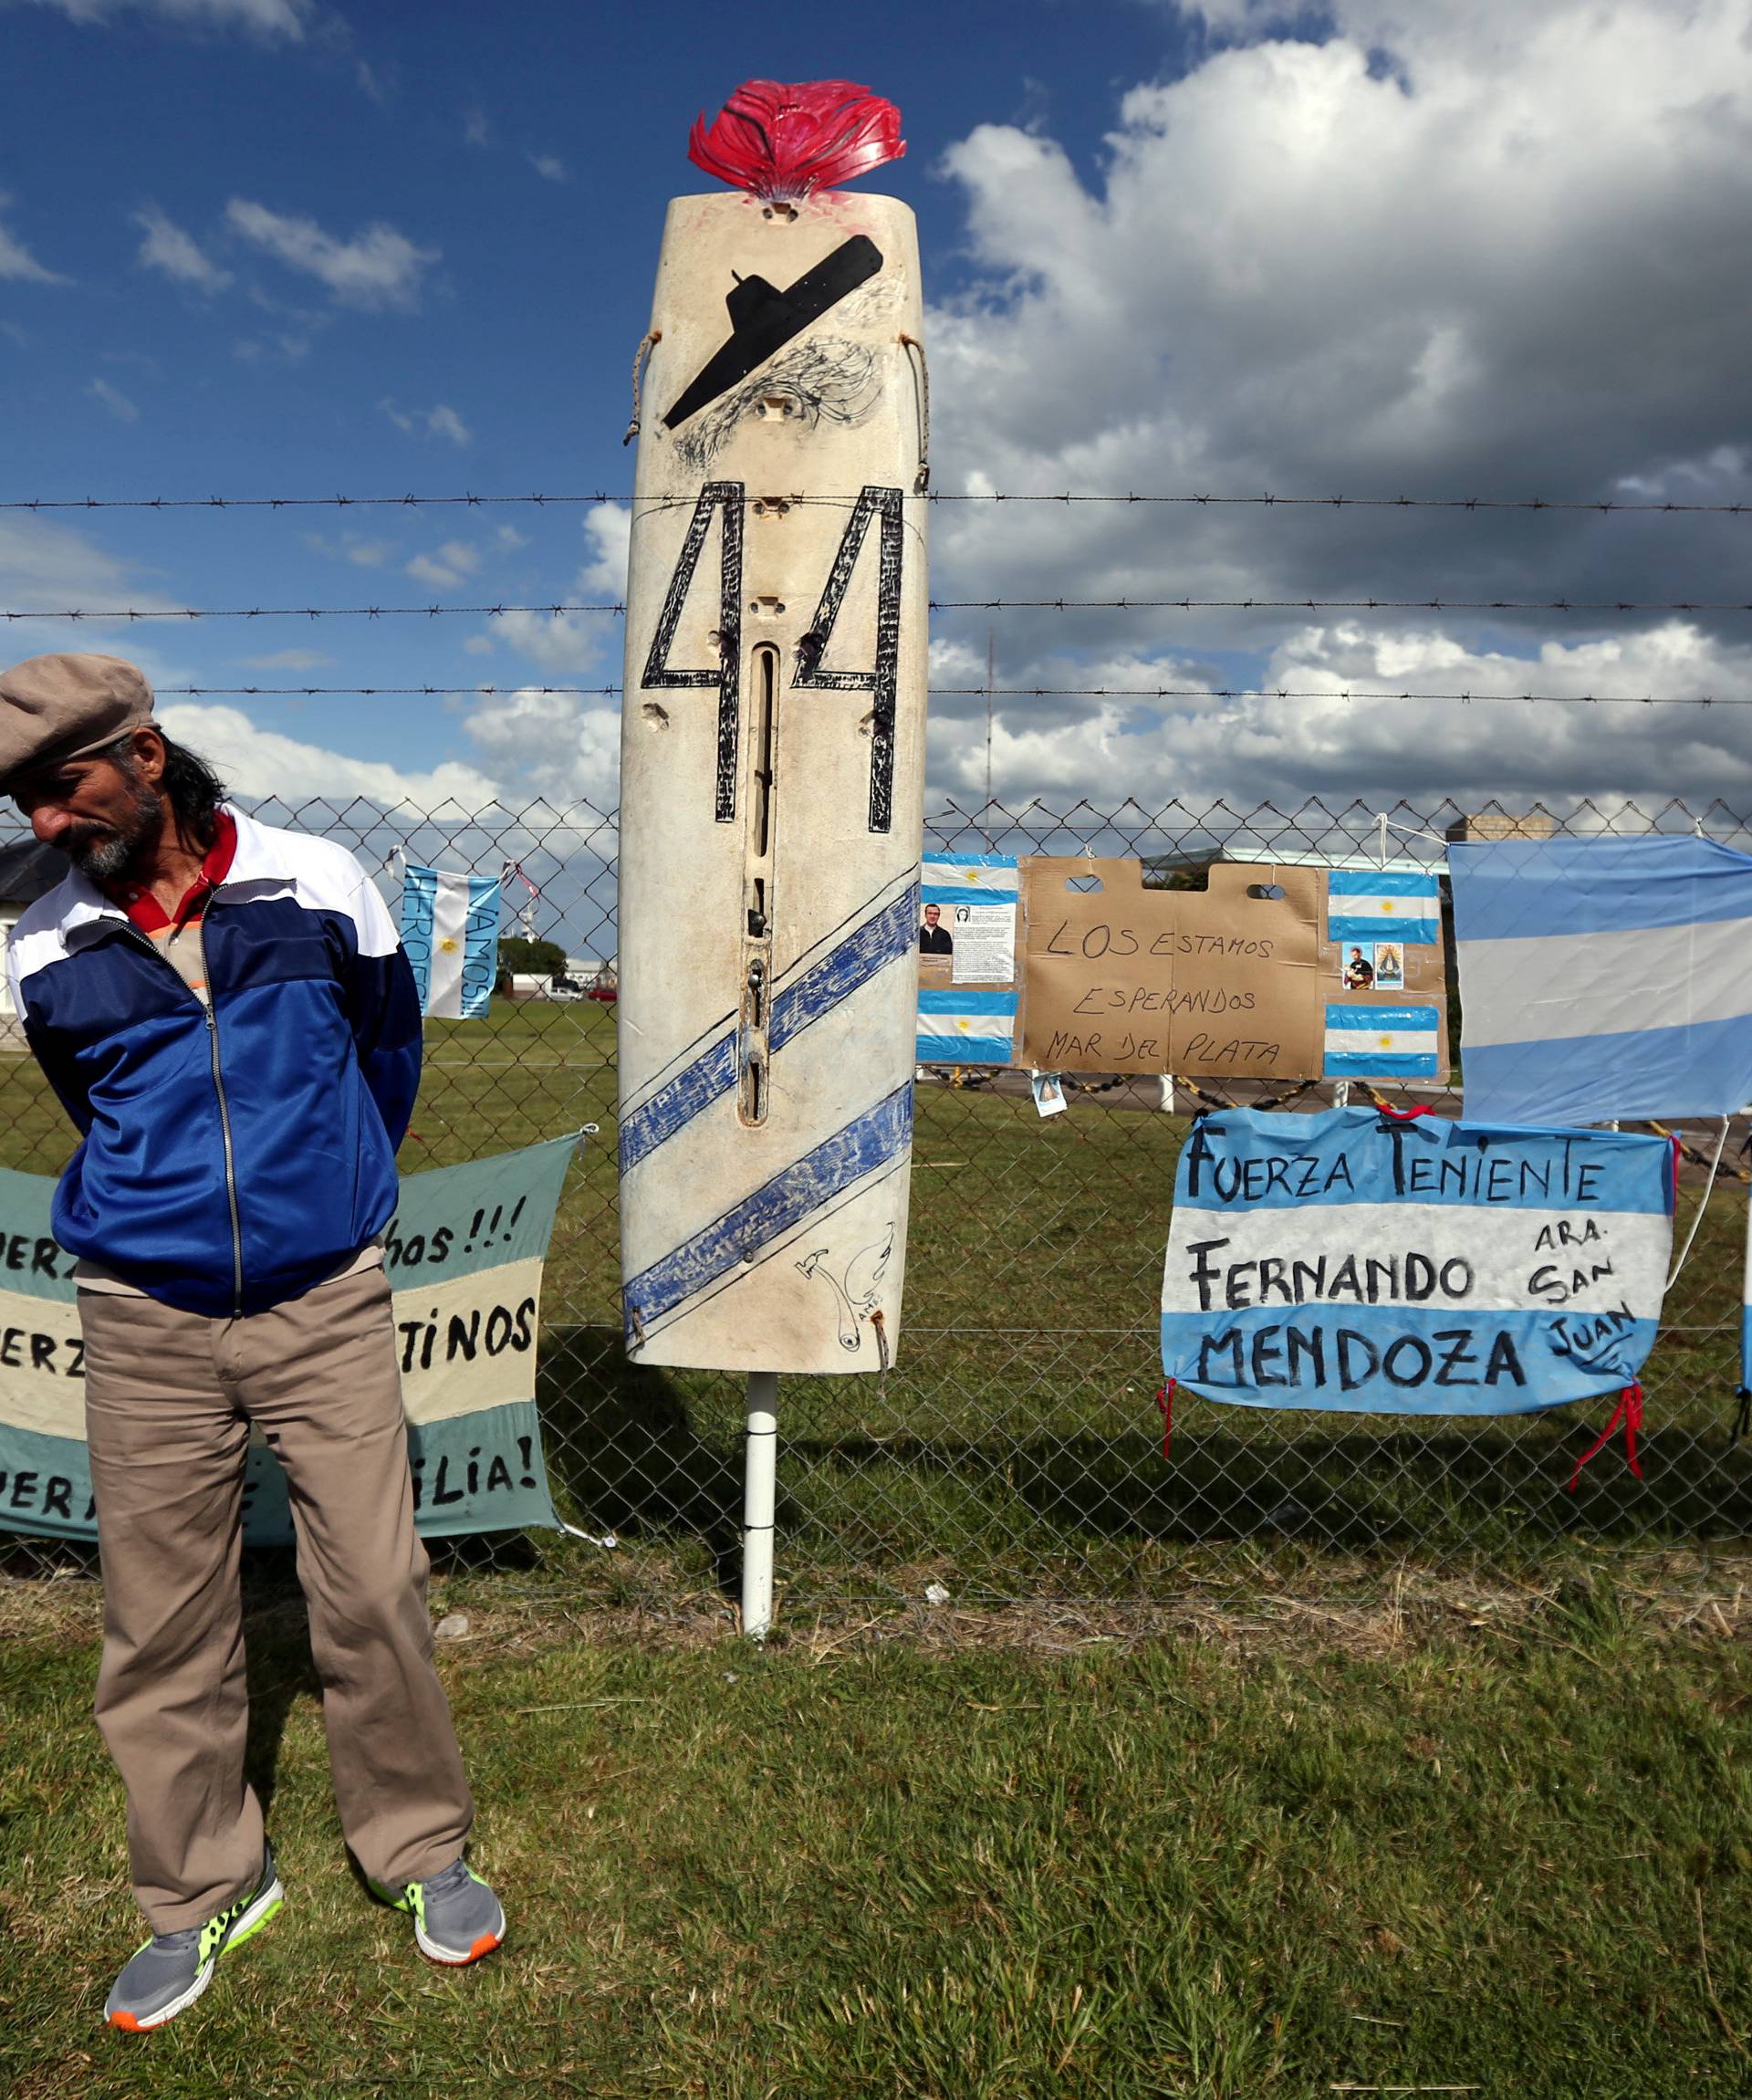 A man stands in front of signs in support of the missing crew members of the ARA San Juan submarine in Mar del Plata